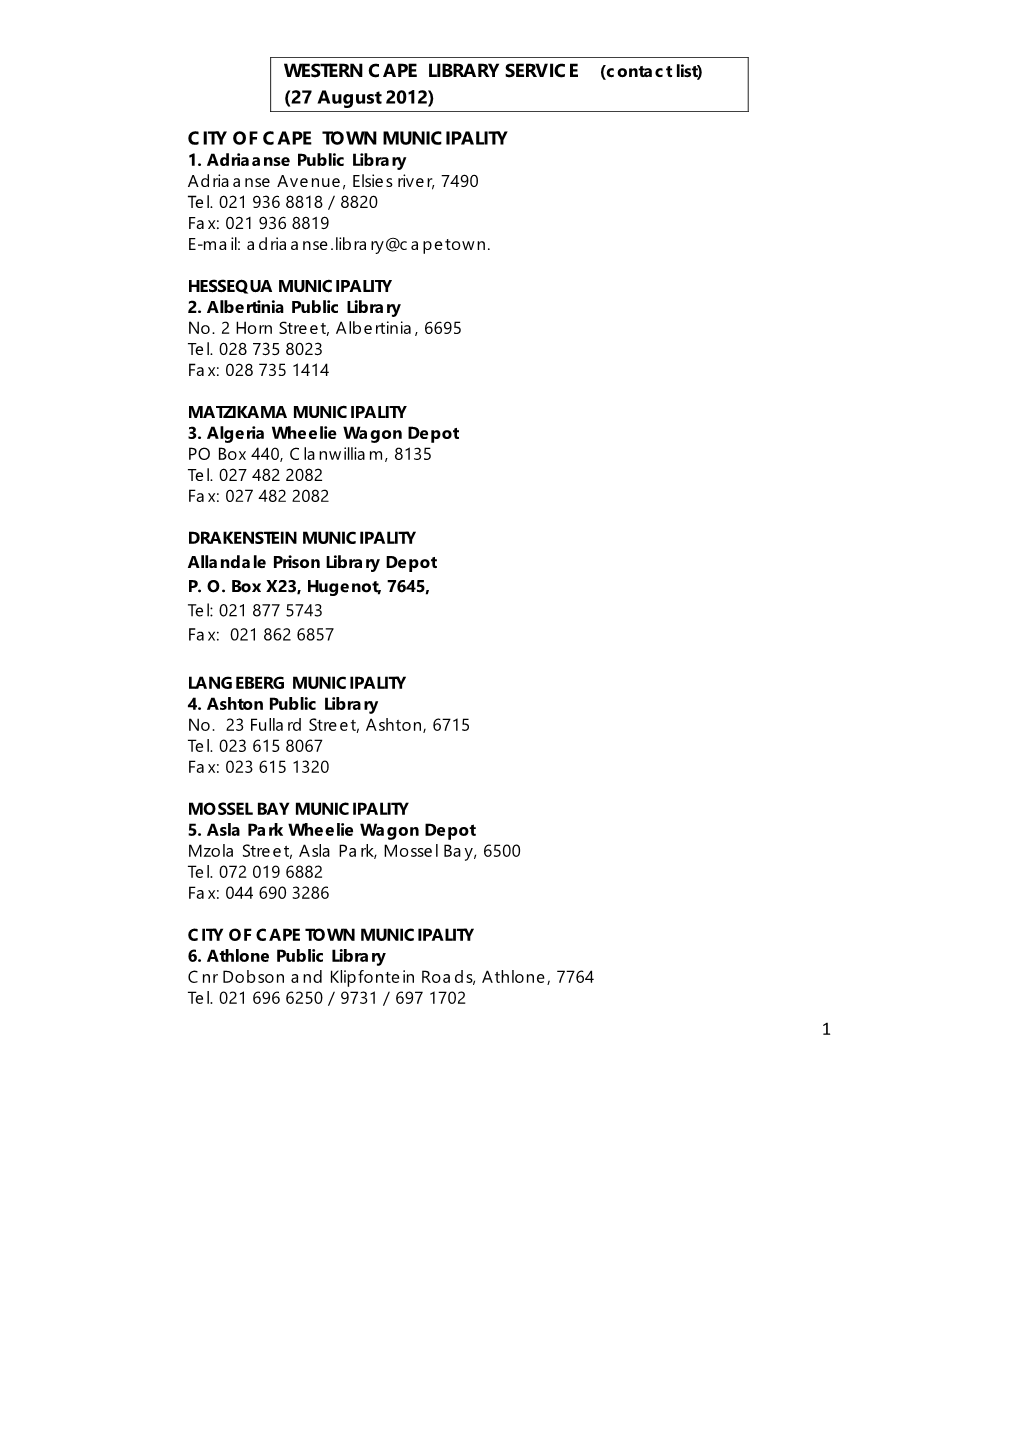 WESTERN CAPE LIBRARY SERVICE (Contact List) (27 August 2012)